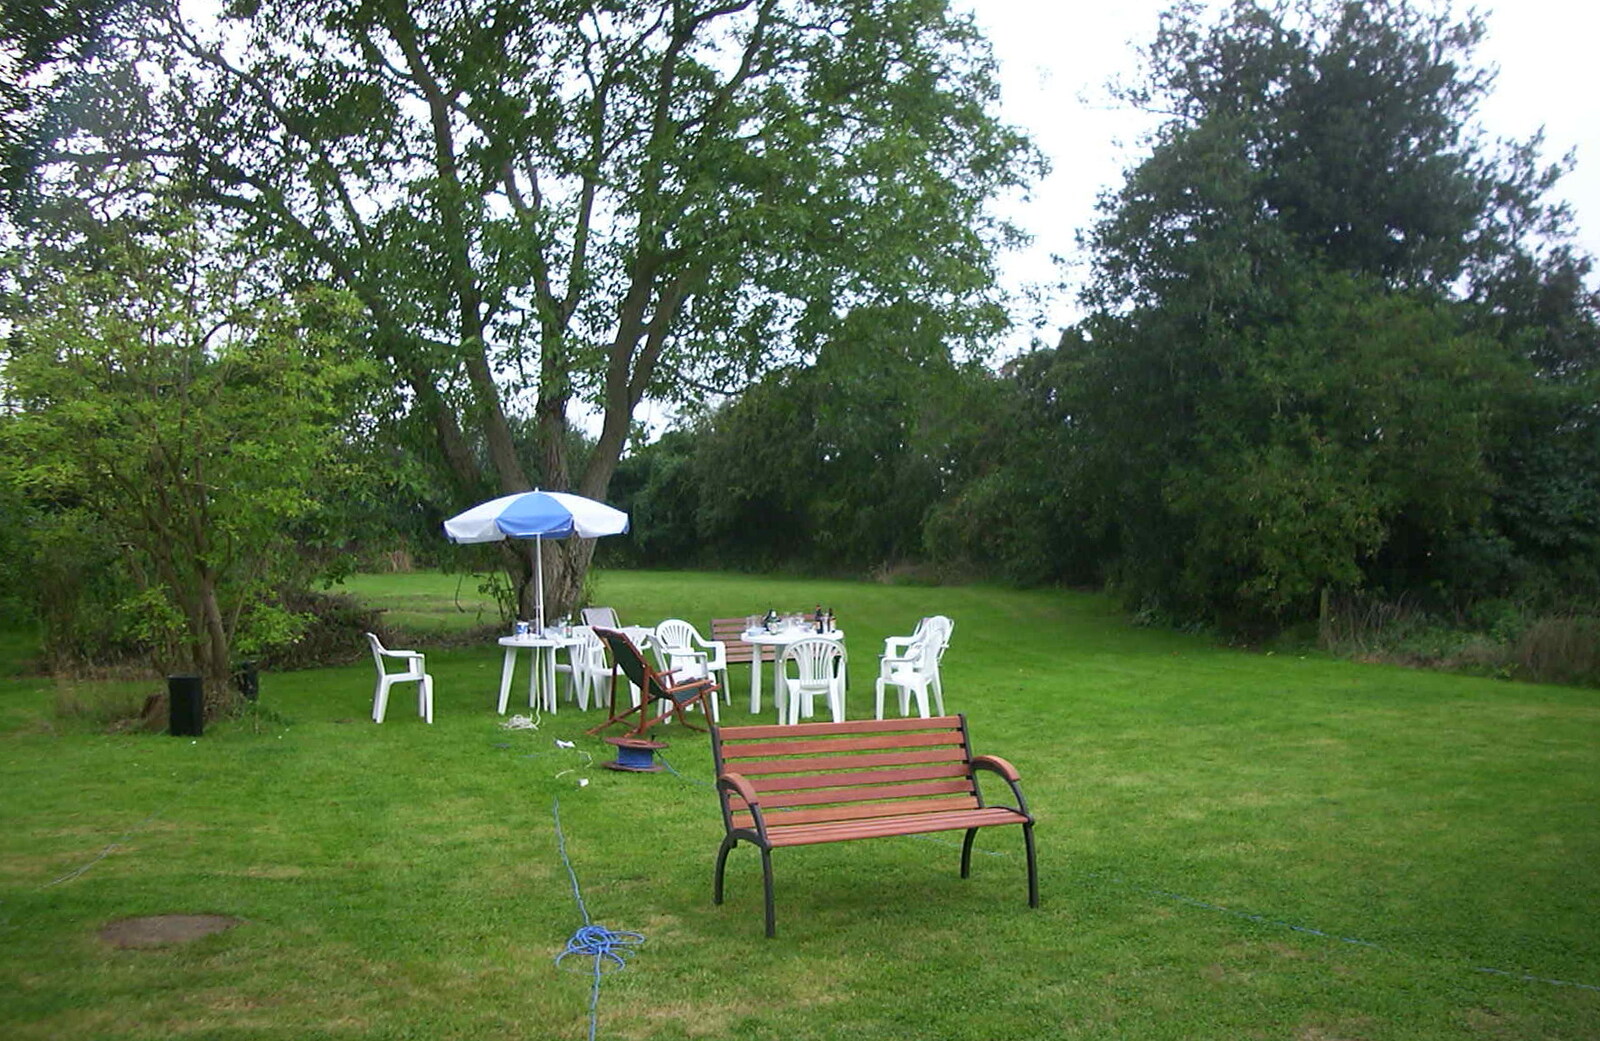 The garden is empty from Nosher's BSCC Barbeque, Brome, Suffolk - 3rd August 2002